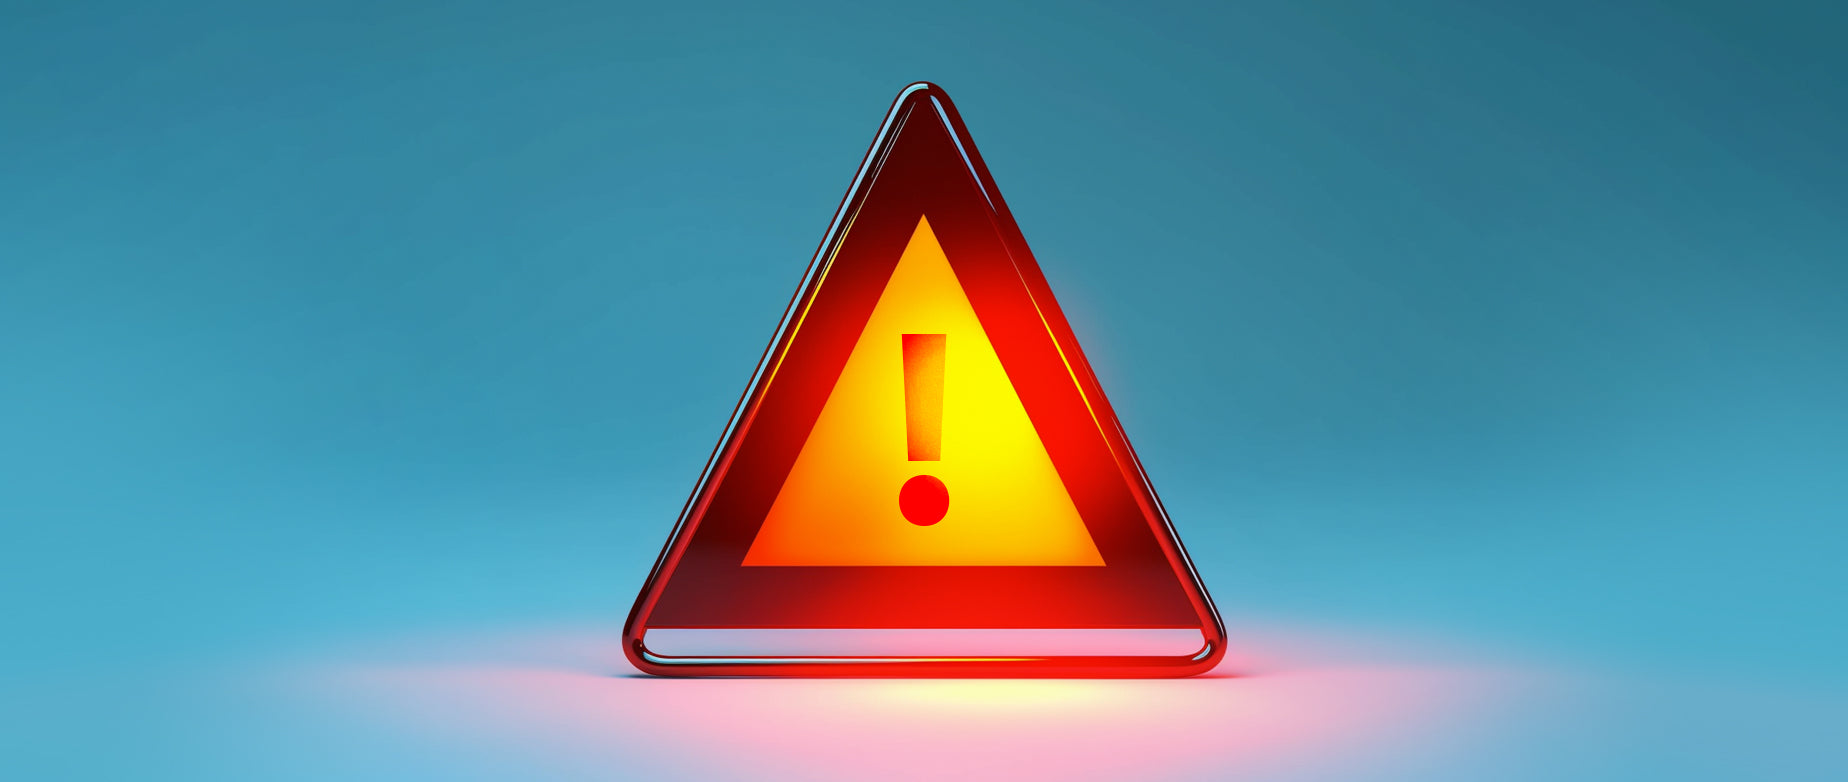 red triangle warning sign: business risk management